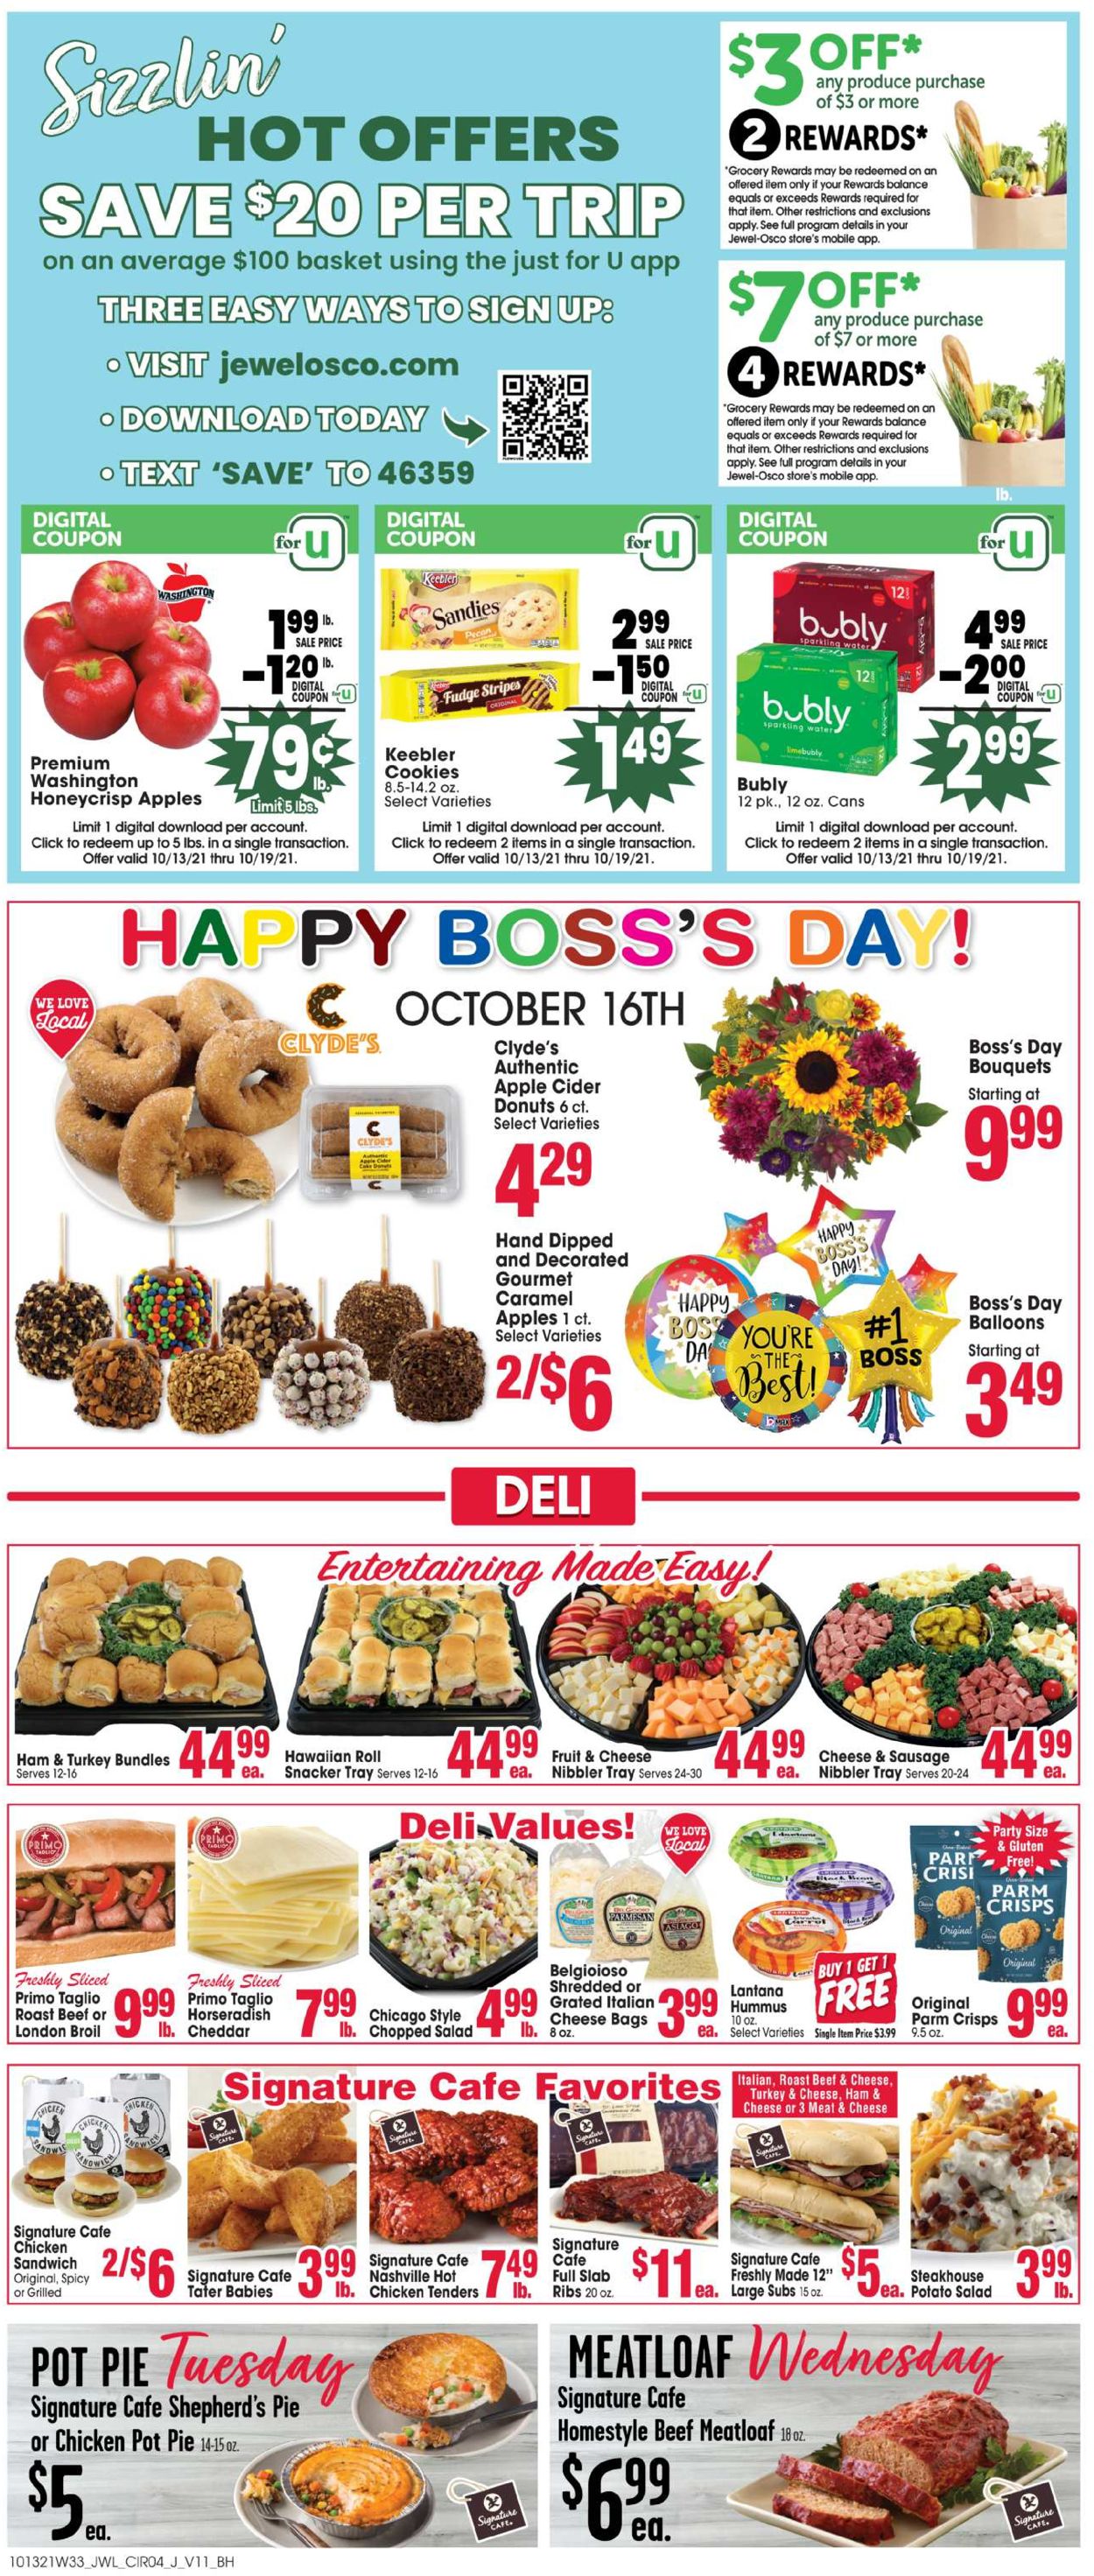 Catalogue Jewel Osco Sweetest Day from 10/13/2021